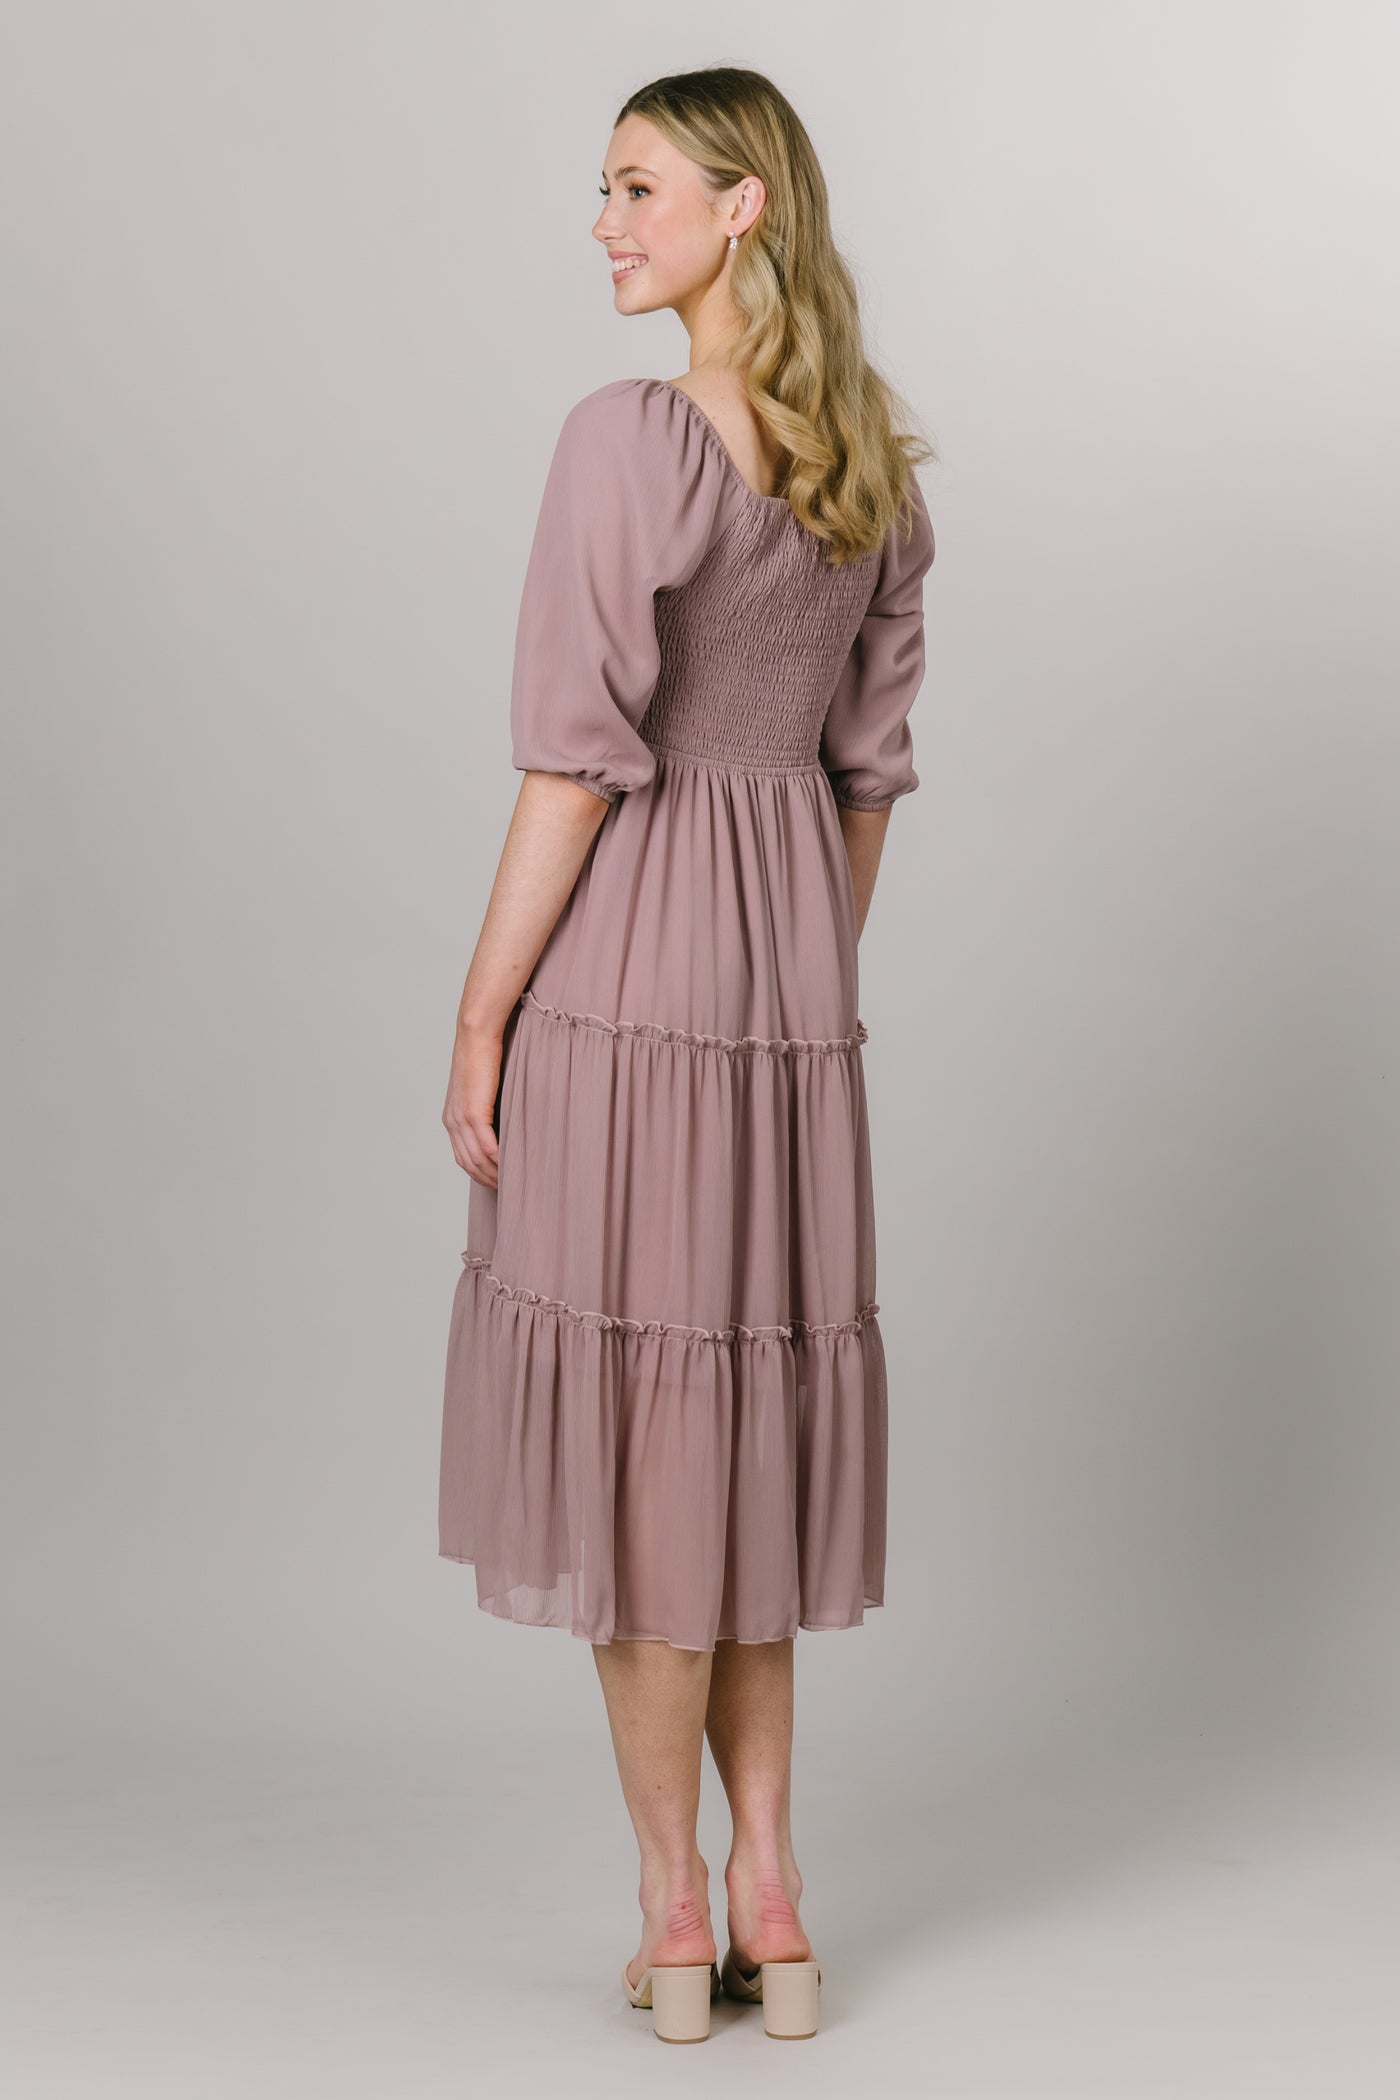 The back view of the square neck line with puff sleeves and a smocked bodice and tiered panel skirt. Modest Dresses - Everyday Dresses - Modest Prom Dress - Formalwear Modest Dresses - Bridesmaid Modest Dresses.